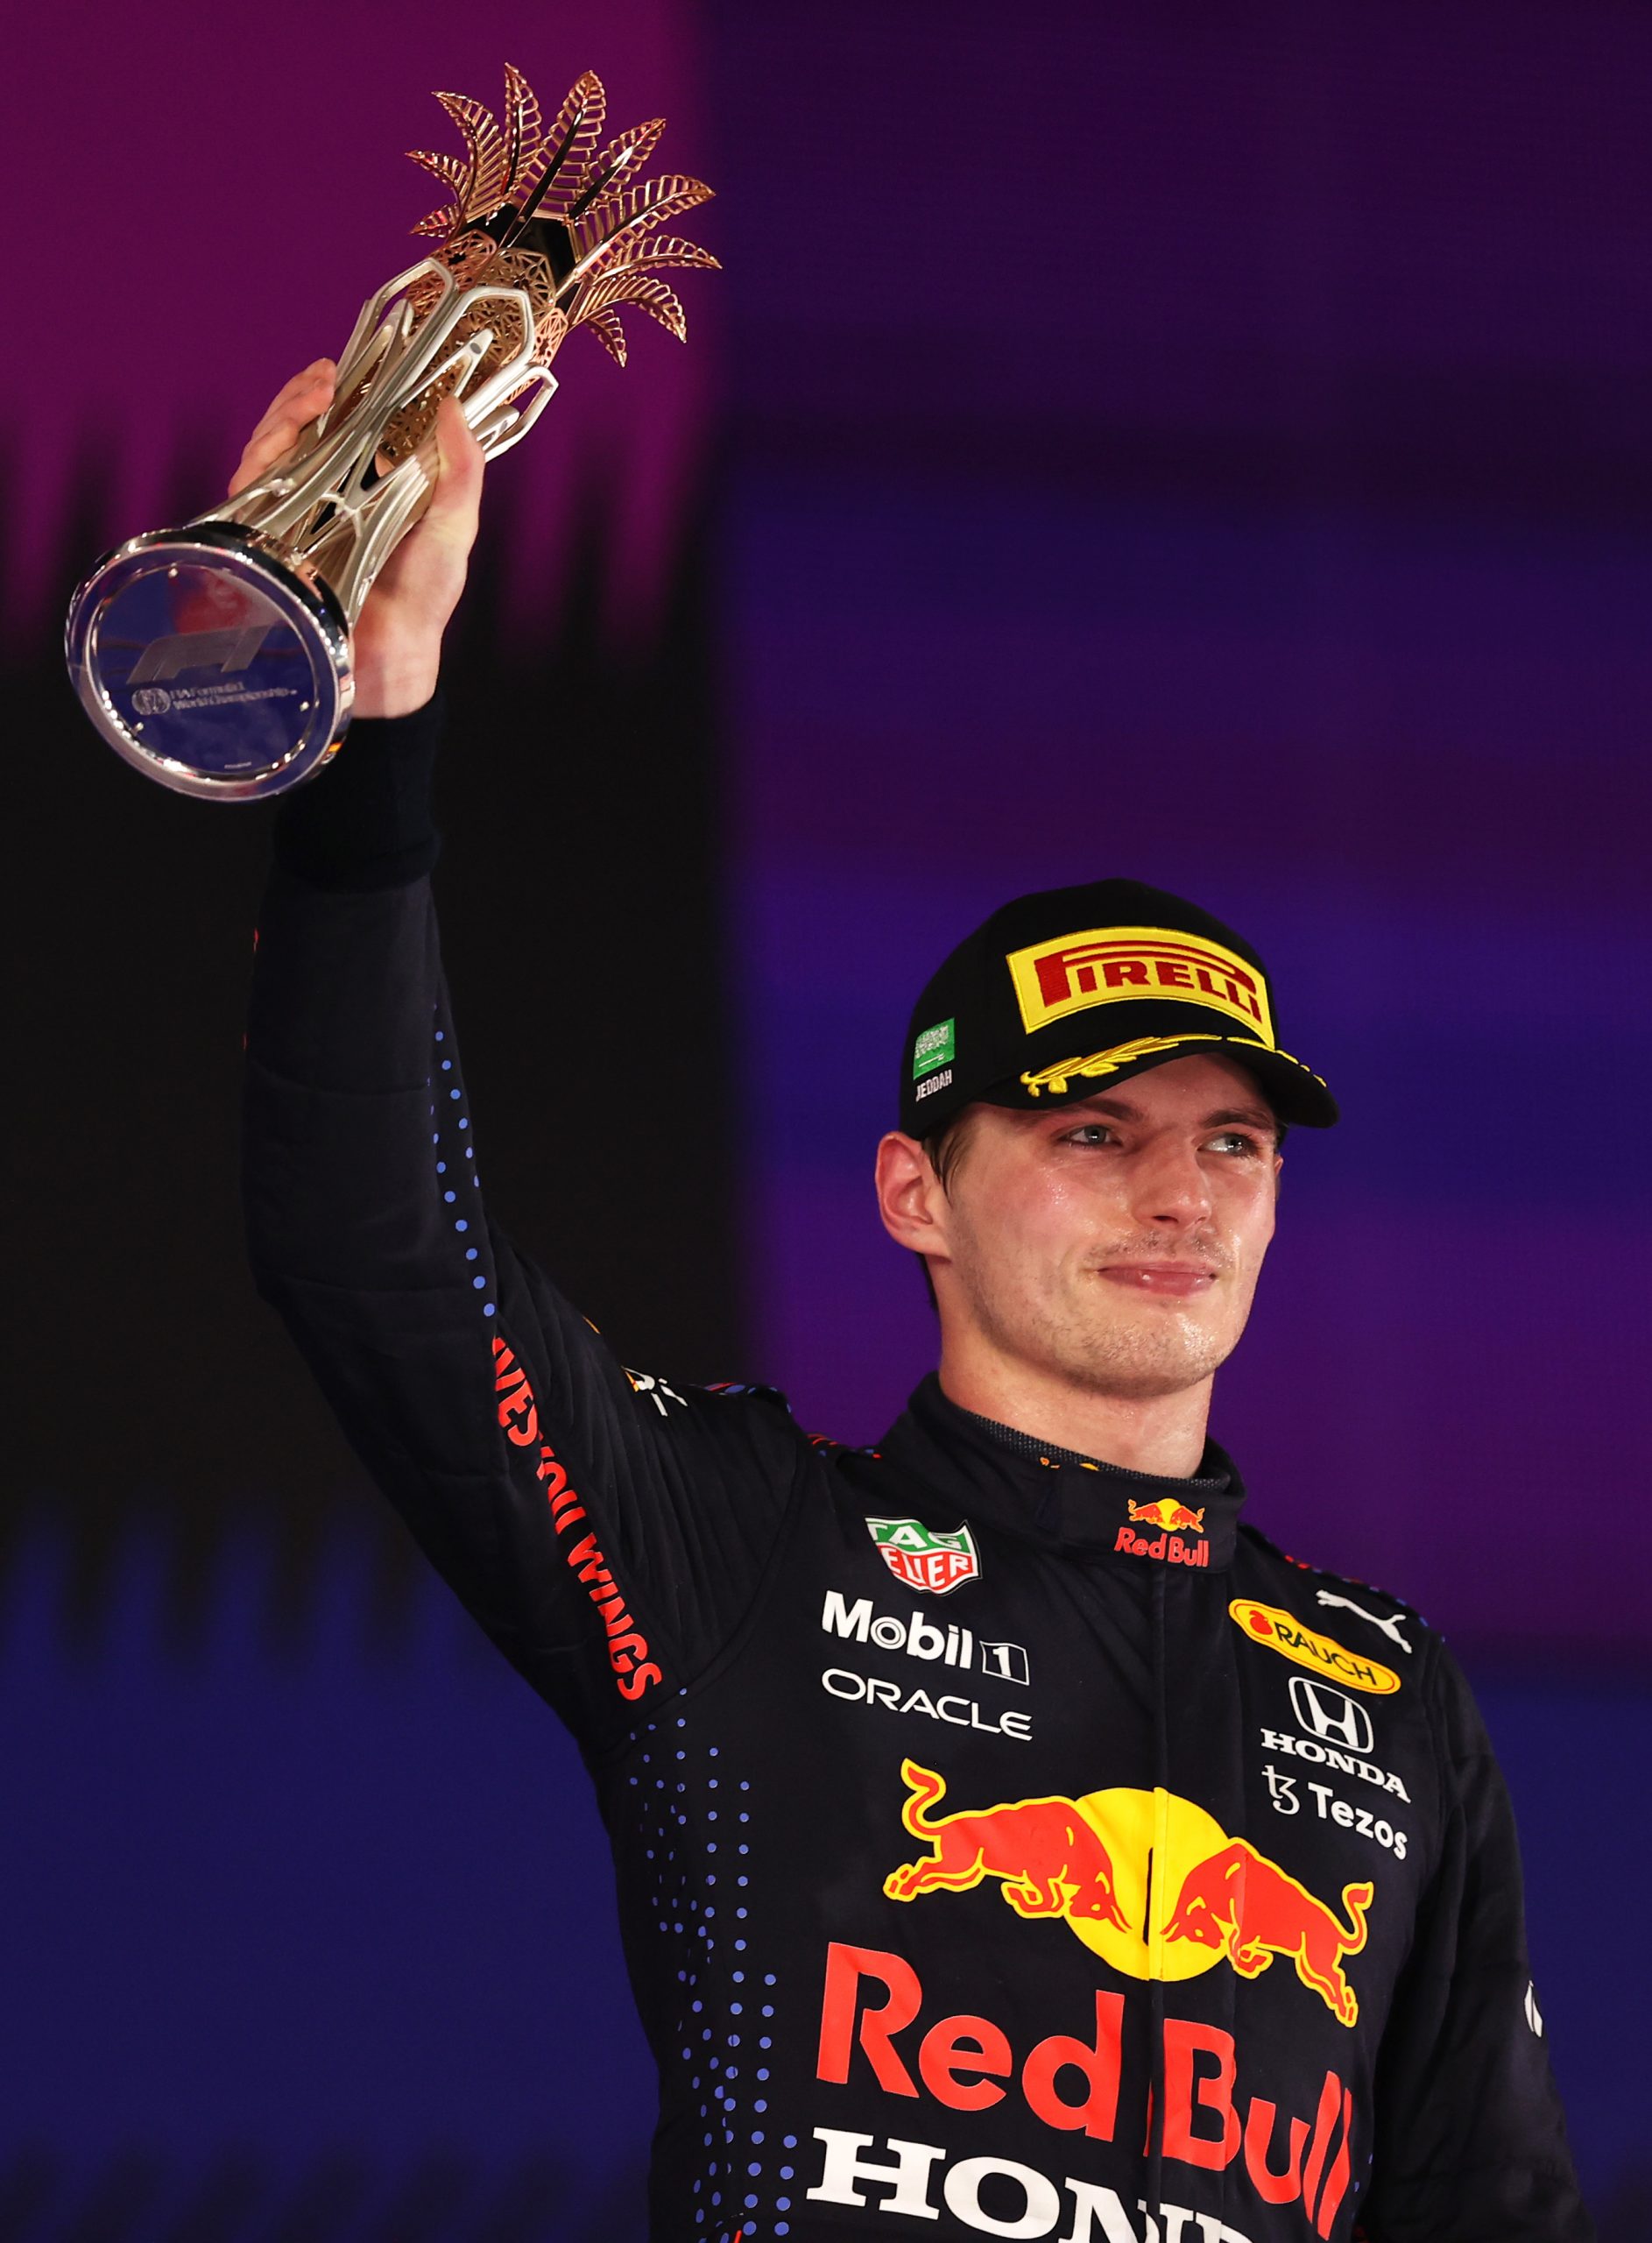 Max Verstappen Heads to Abu Dhabi Level in Points With Lewis Hamilton. This Is What Max Needs To Do To Win His First World Championship